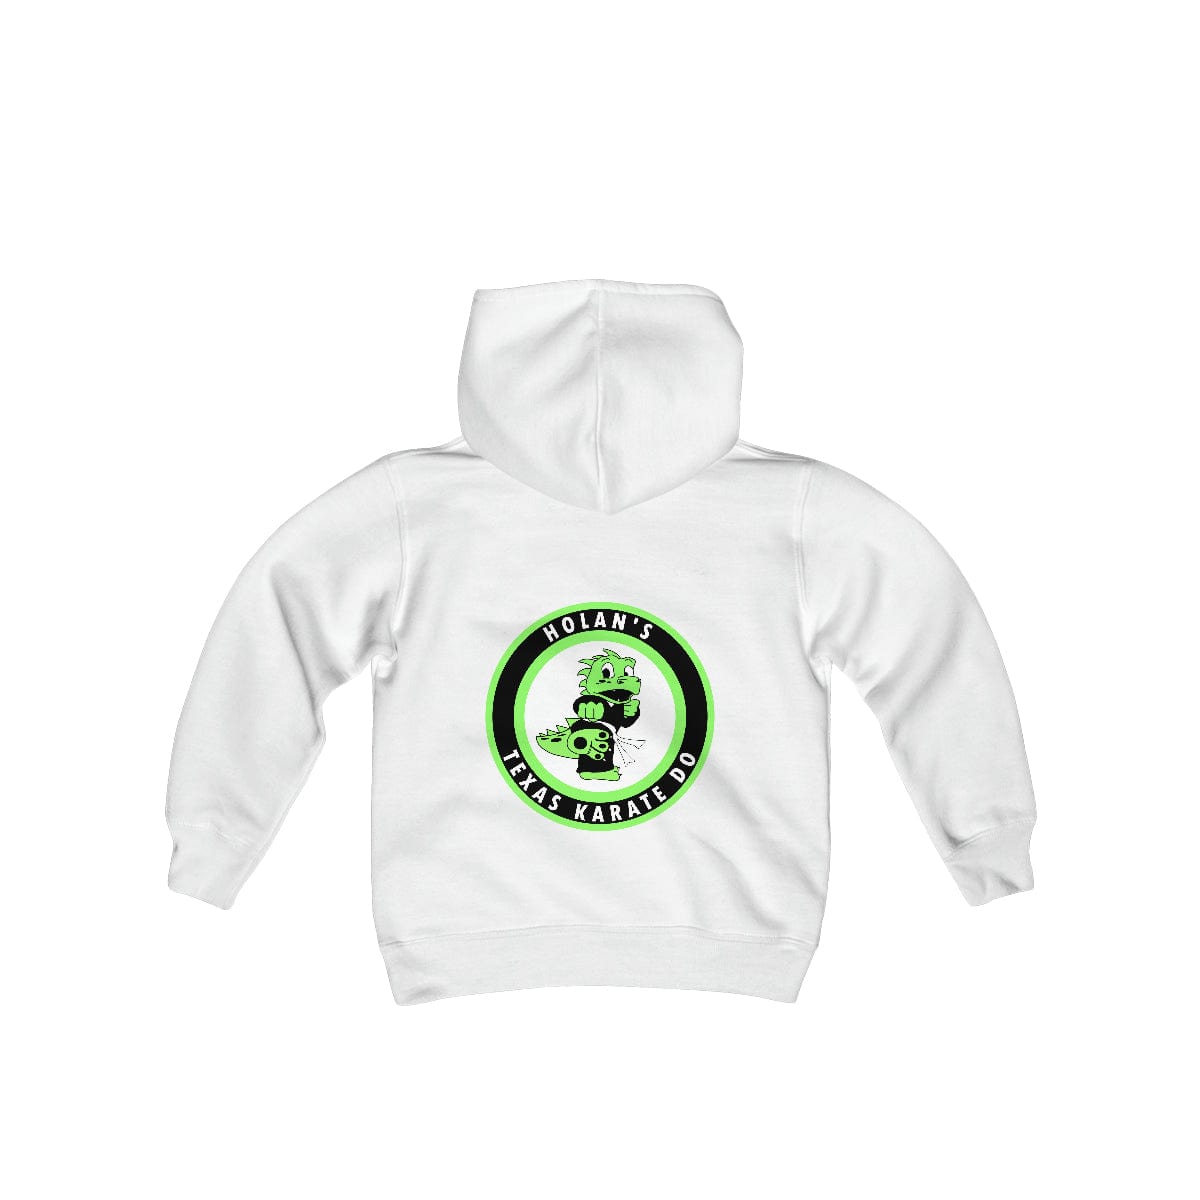 Printify Kids clothes Holans Texas Karate Do Youth Lil Dragon Hoodie